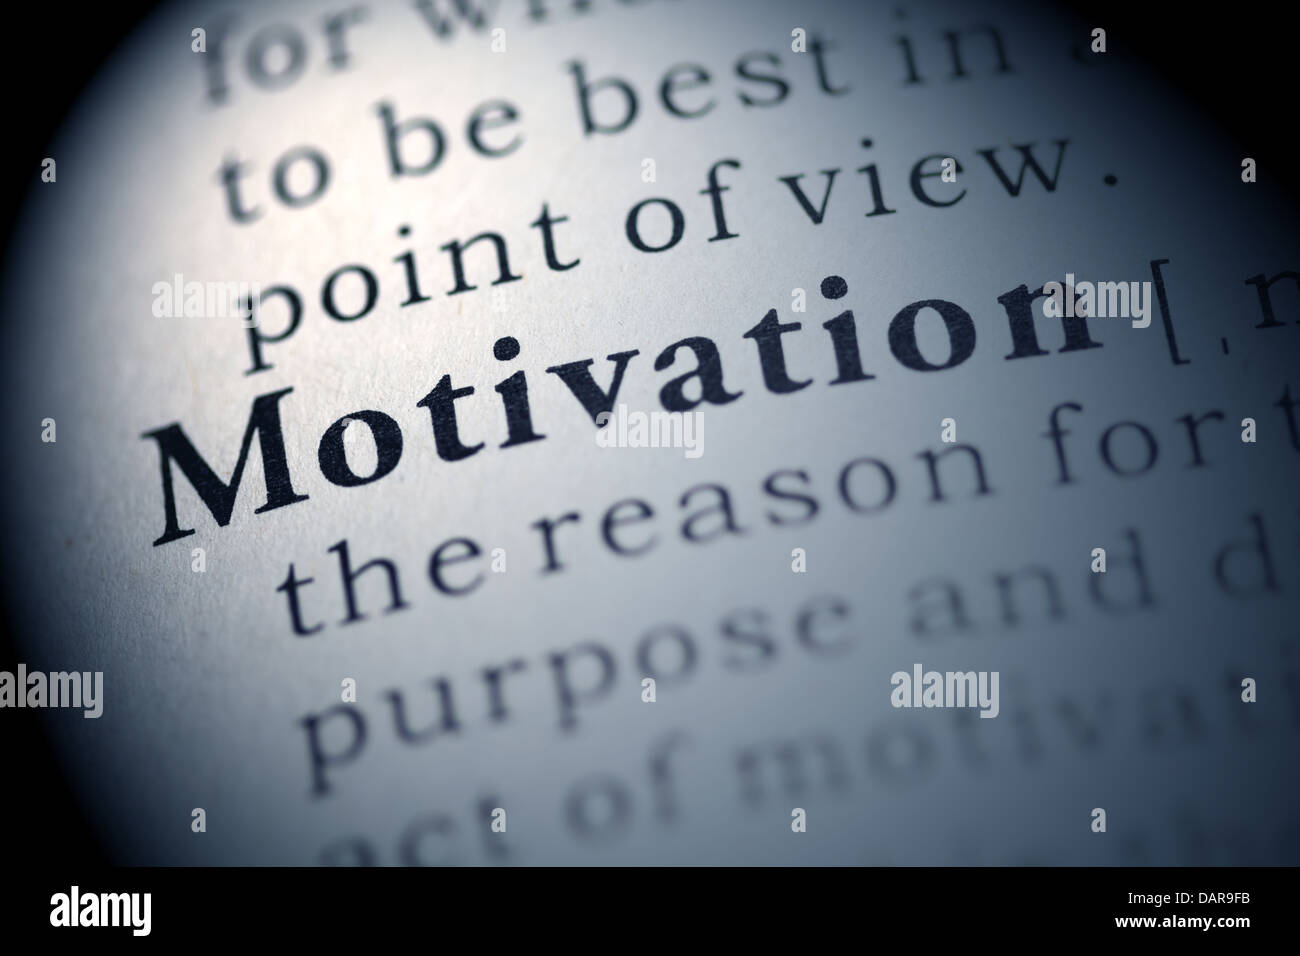 Fake Dictionary, Dictionary definition of the word Motivation. Stock Photo